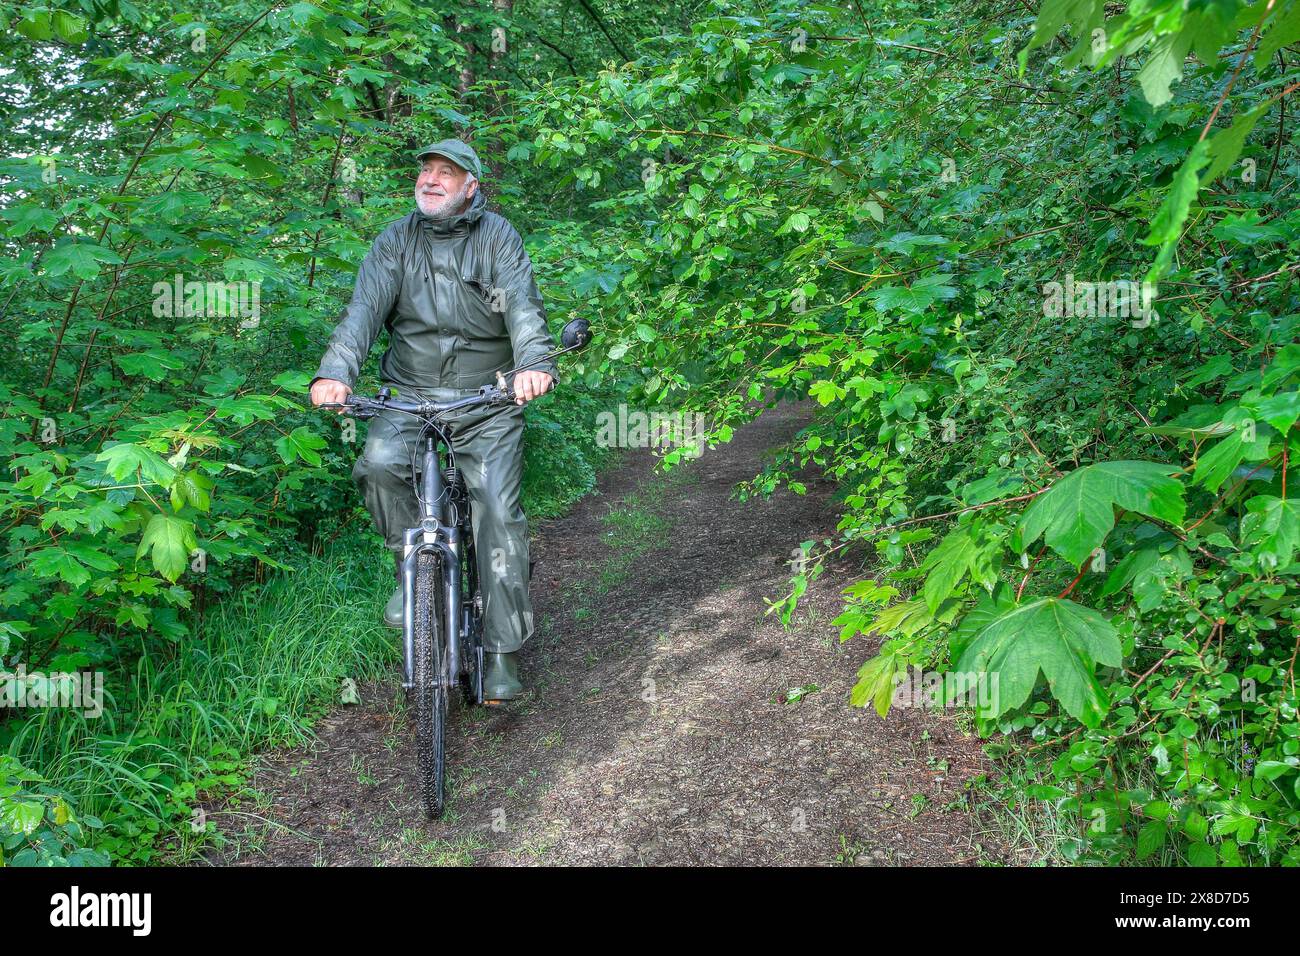 A smiling senior rides his bike through the rain-soaked forest in changeable weather. Stock Photo